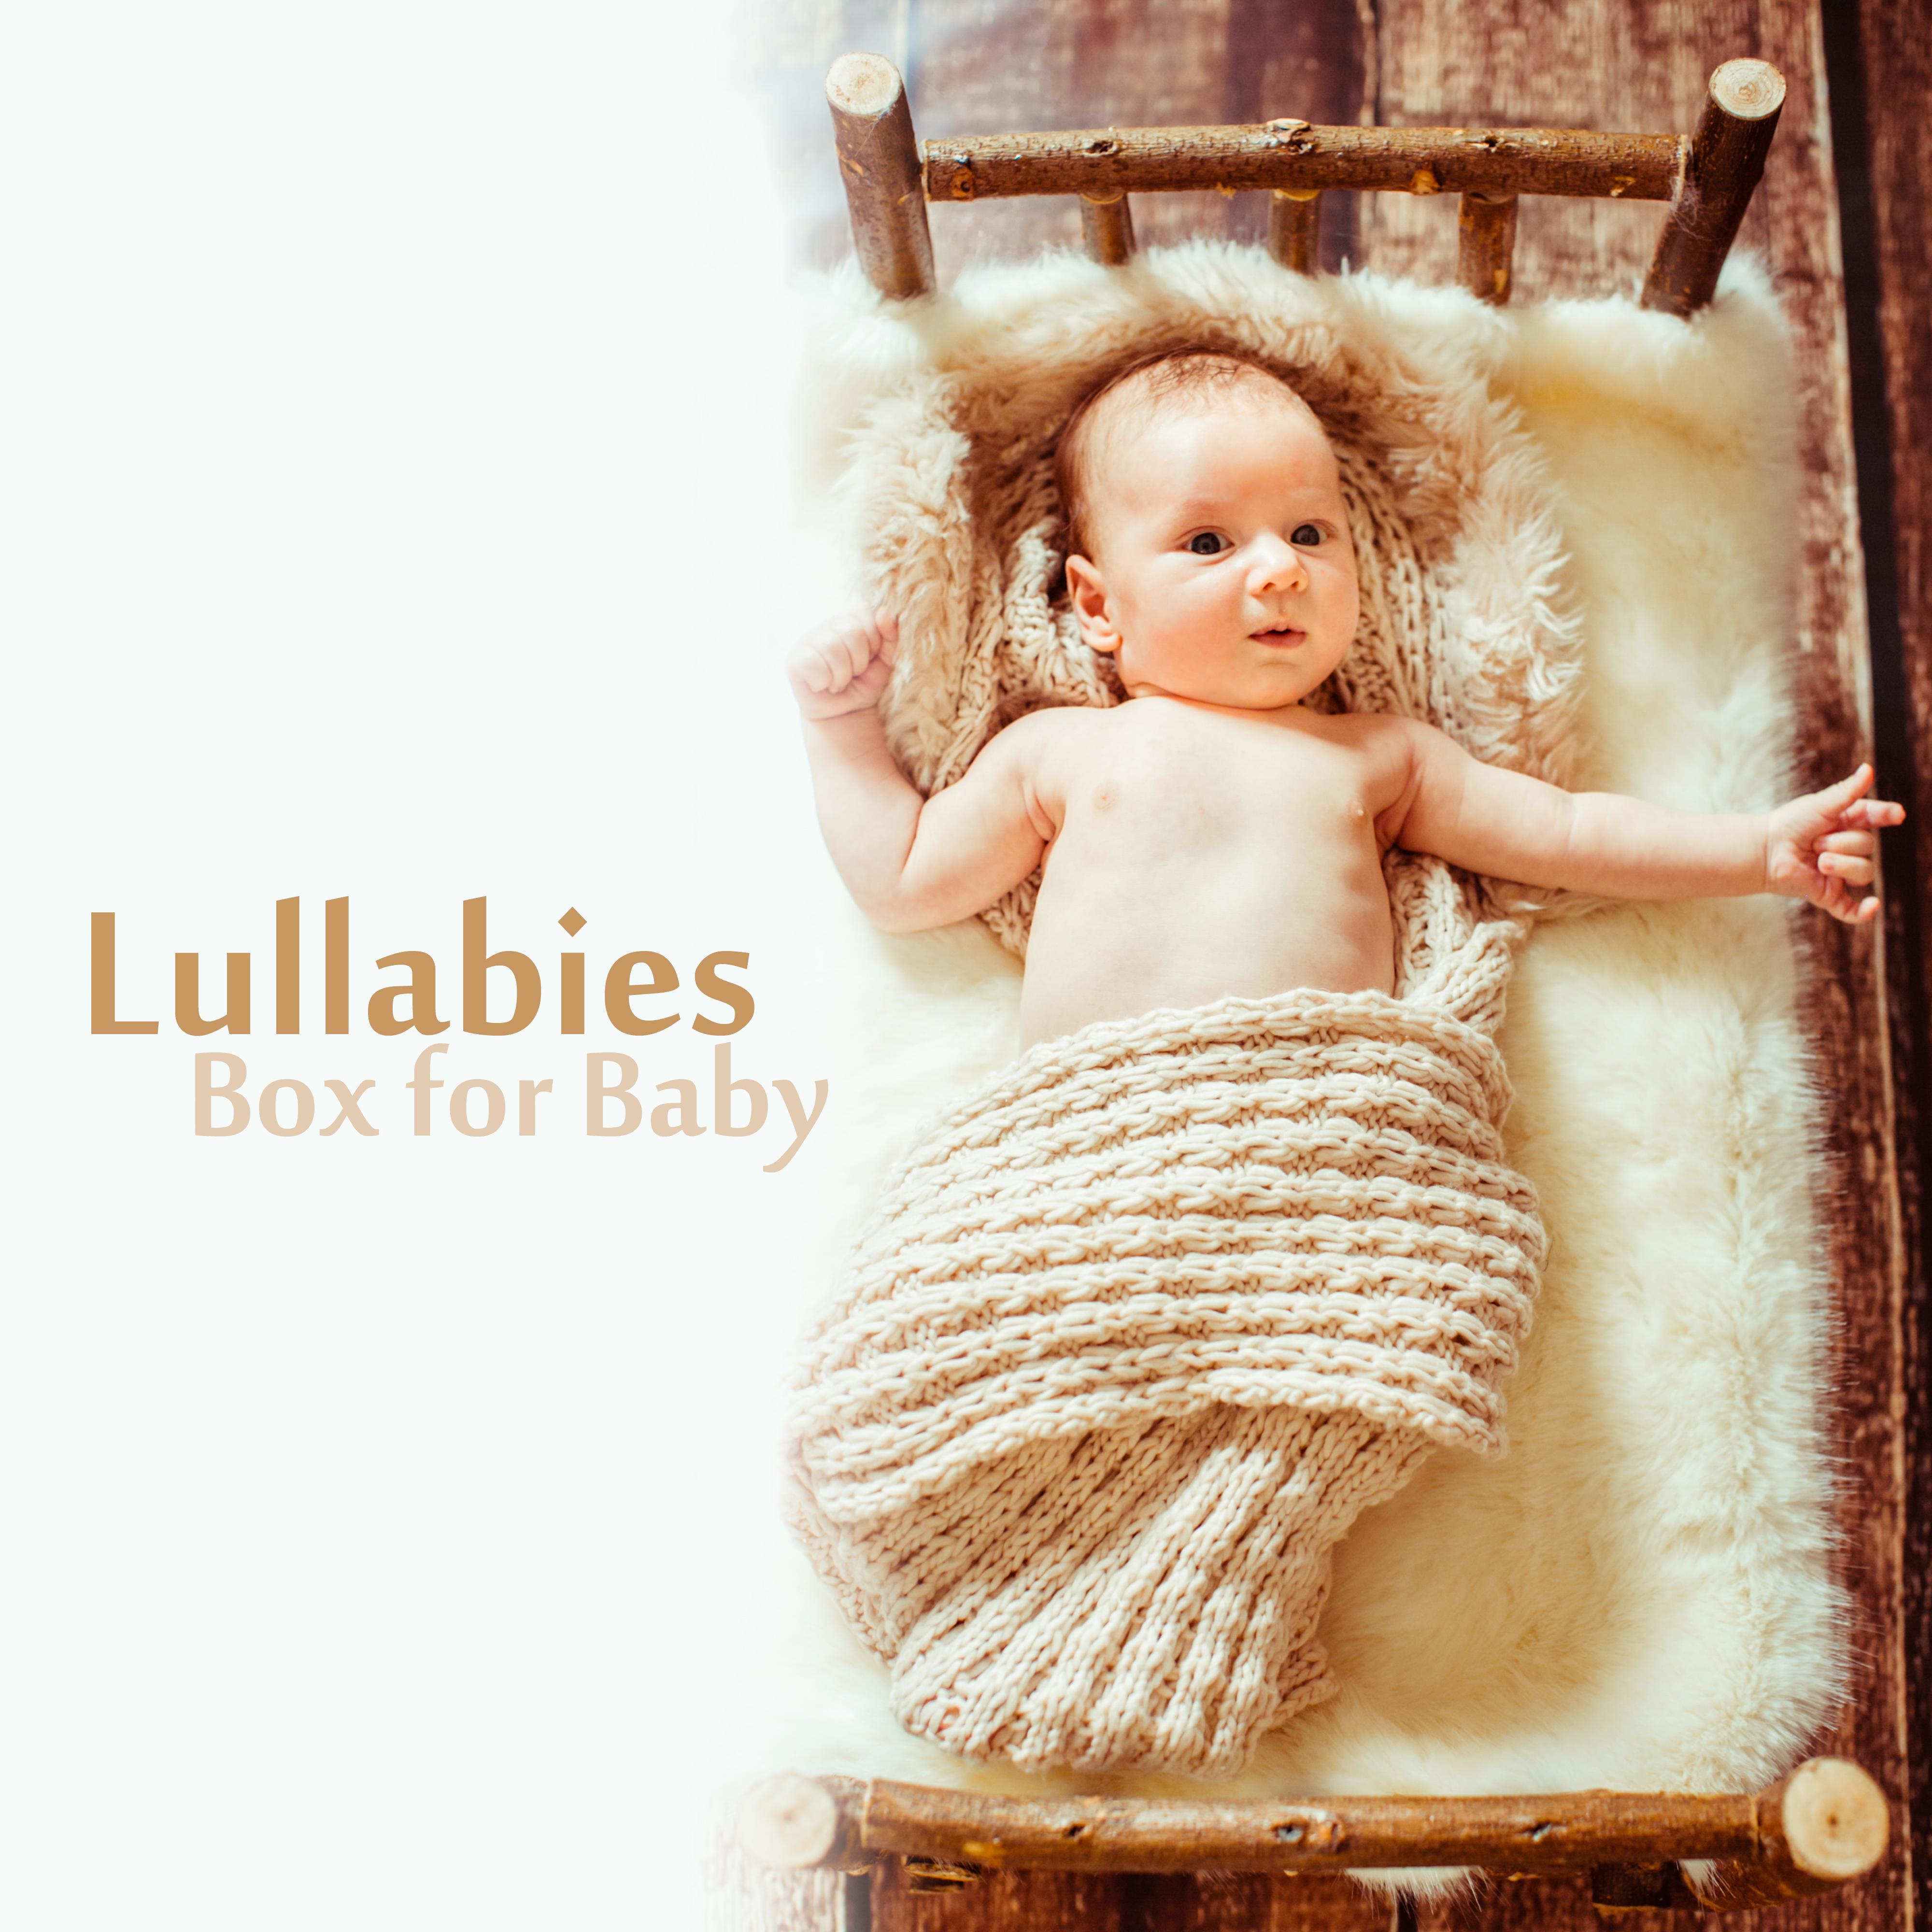 Lullabies Box for Baby